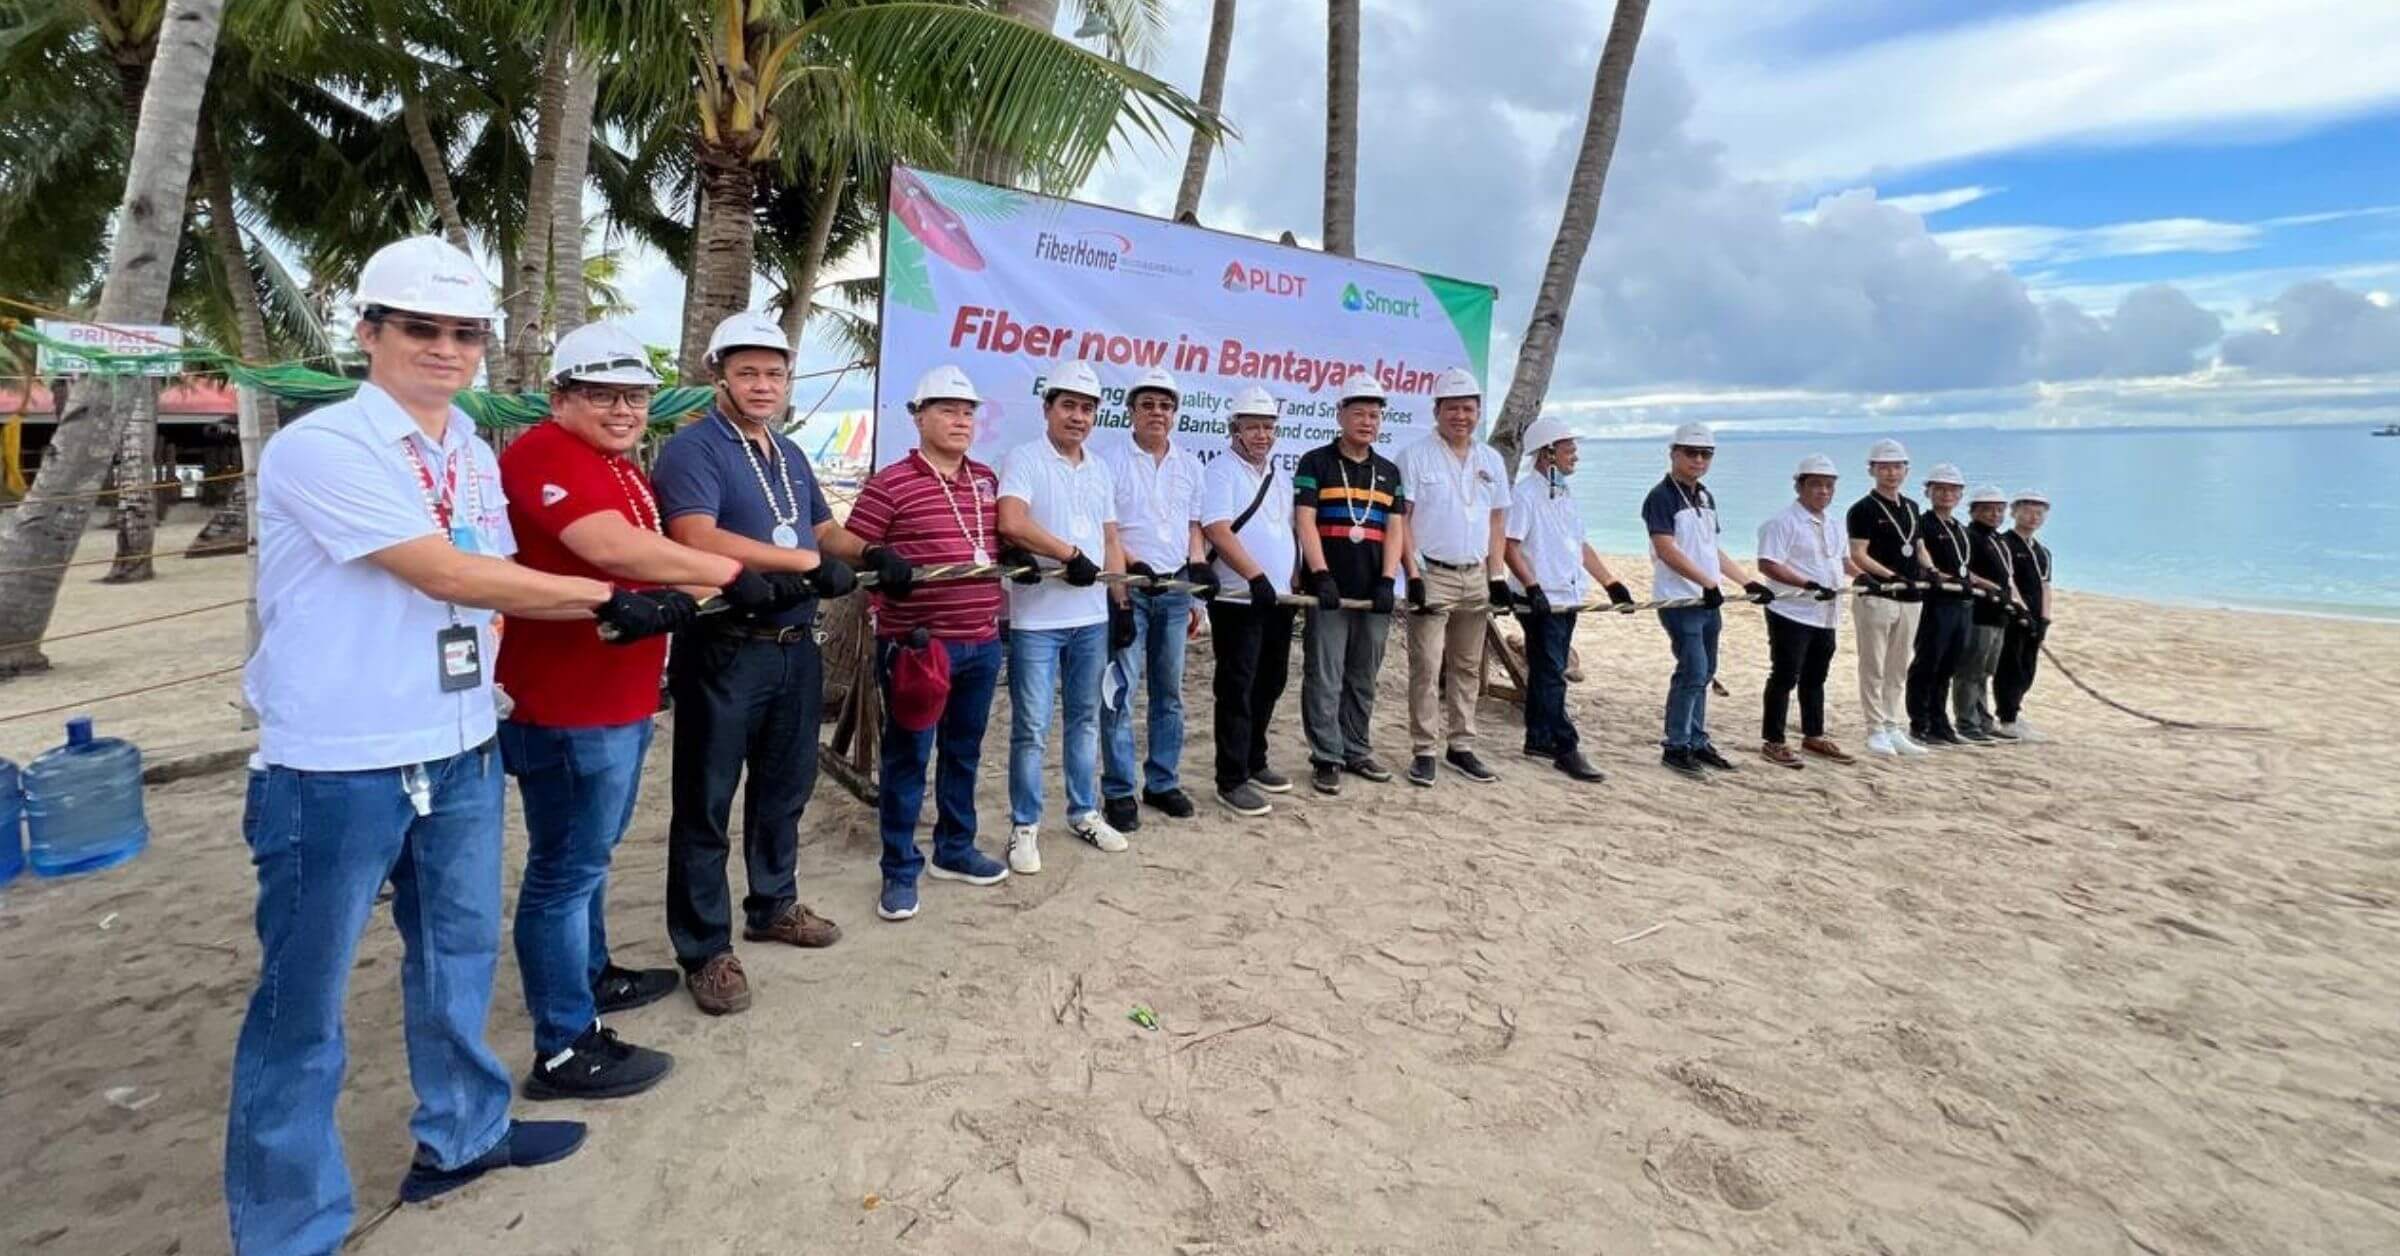 PLDT fibers up Bantayan, Camotes islands; fortifies Visayas connectivity with submarine links